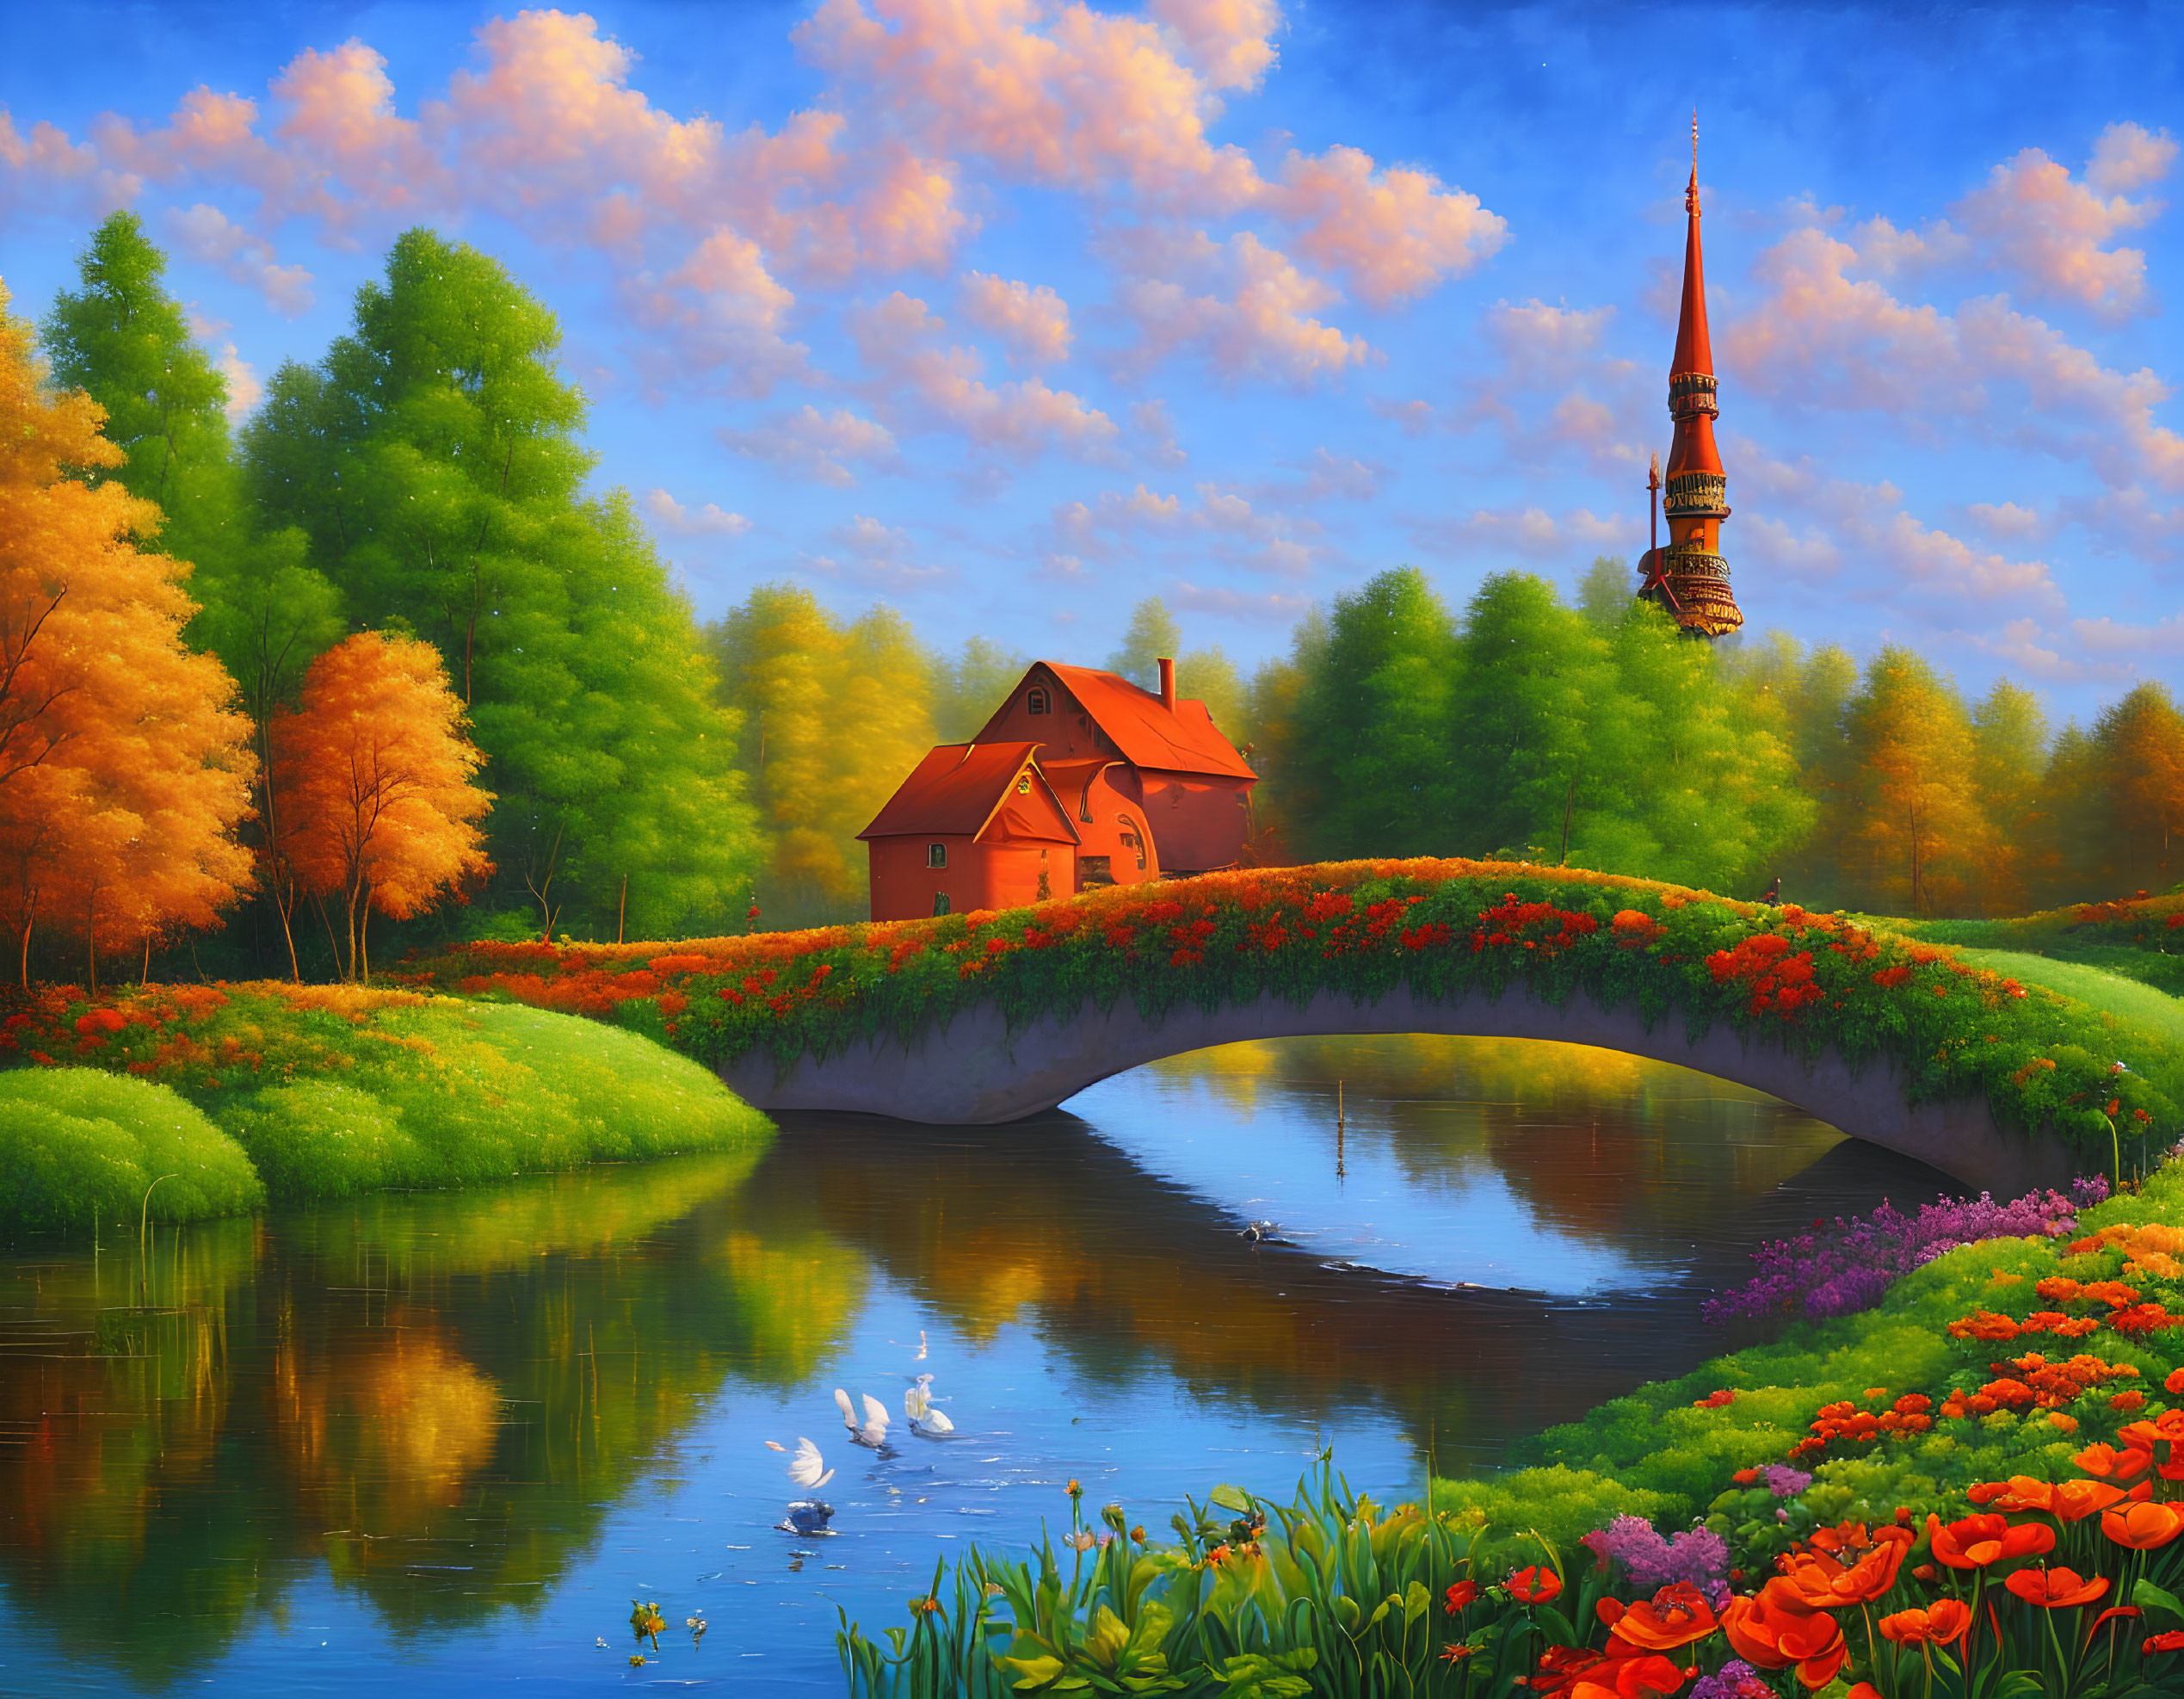 Tranquil river scene with stone bridge, house, spire, trees, flowers, and sw